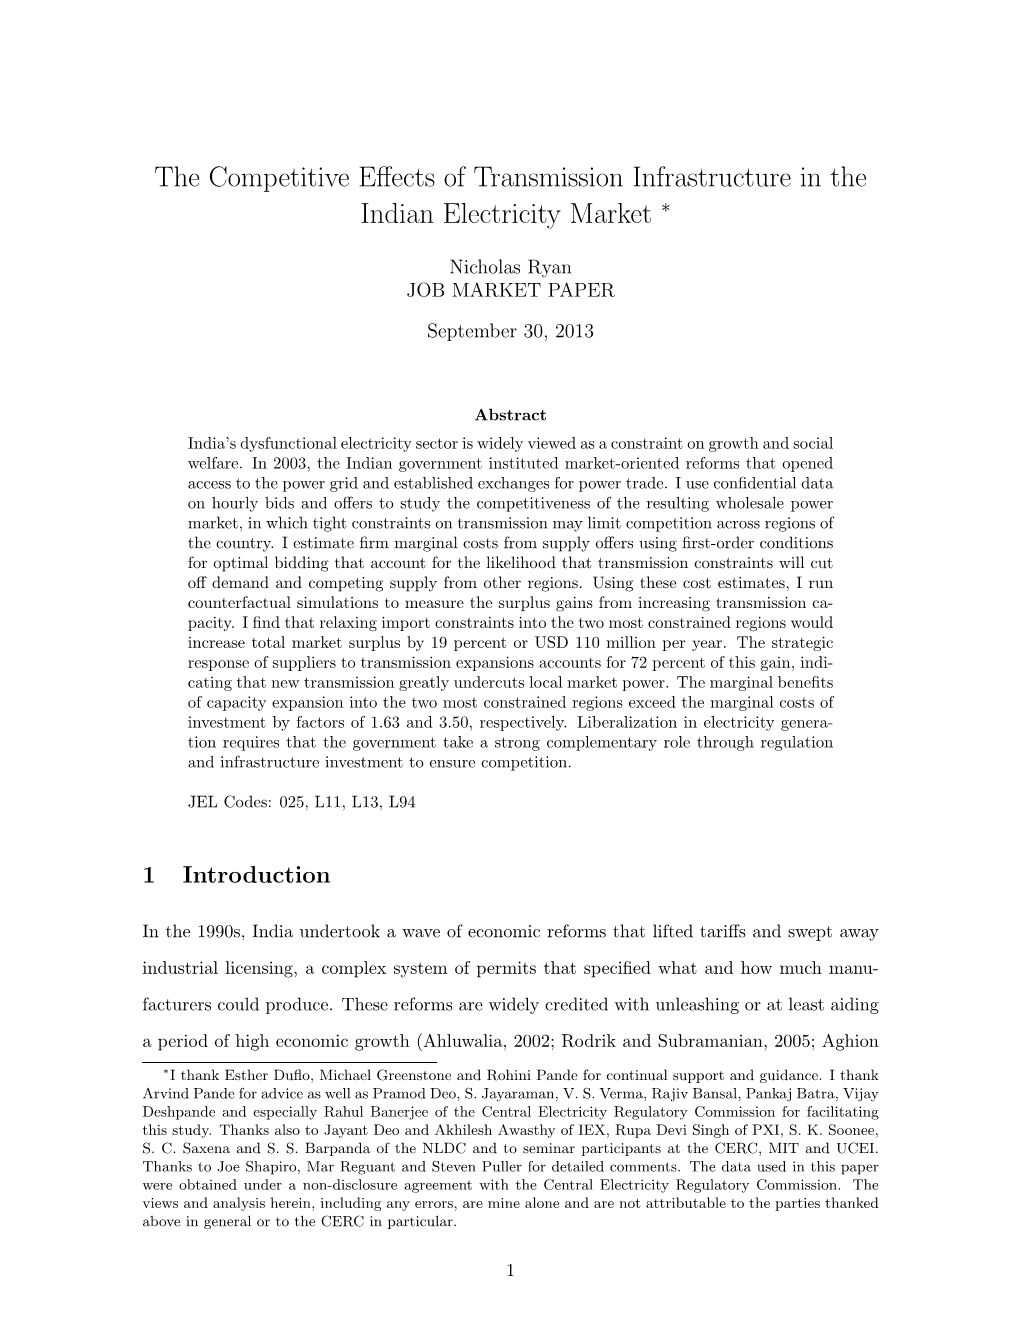 The Competitive Effects of Transmission Infrastructure in The